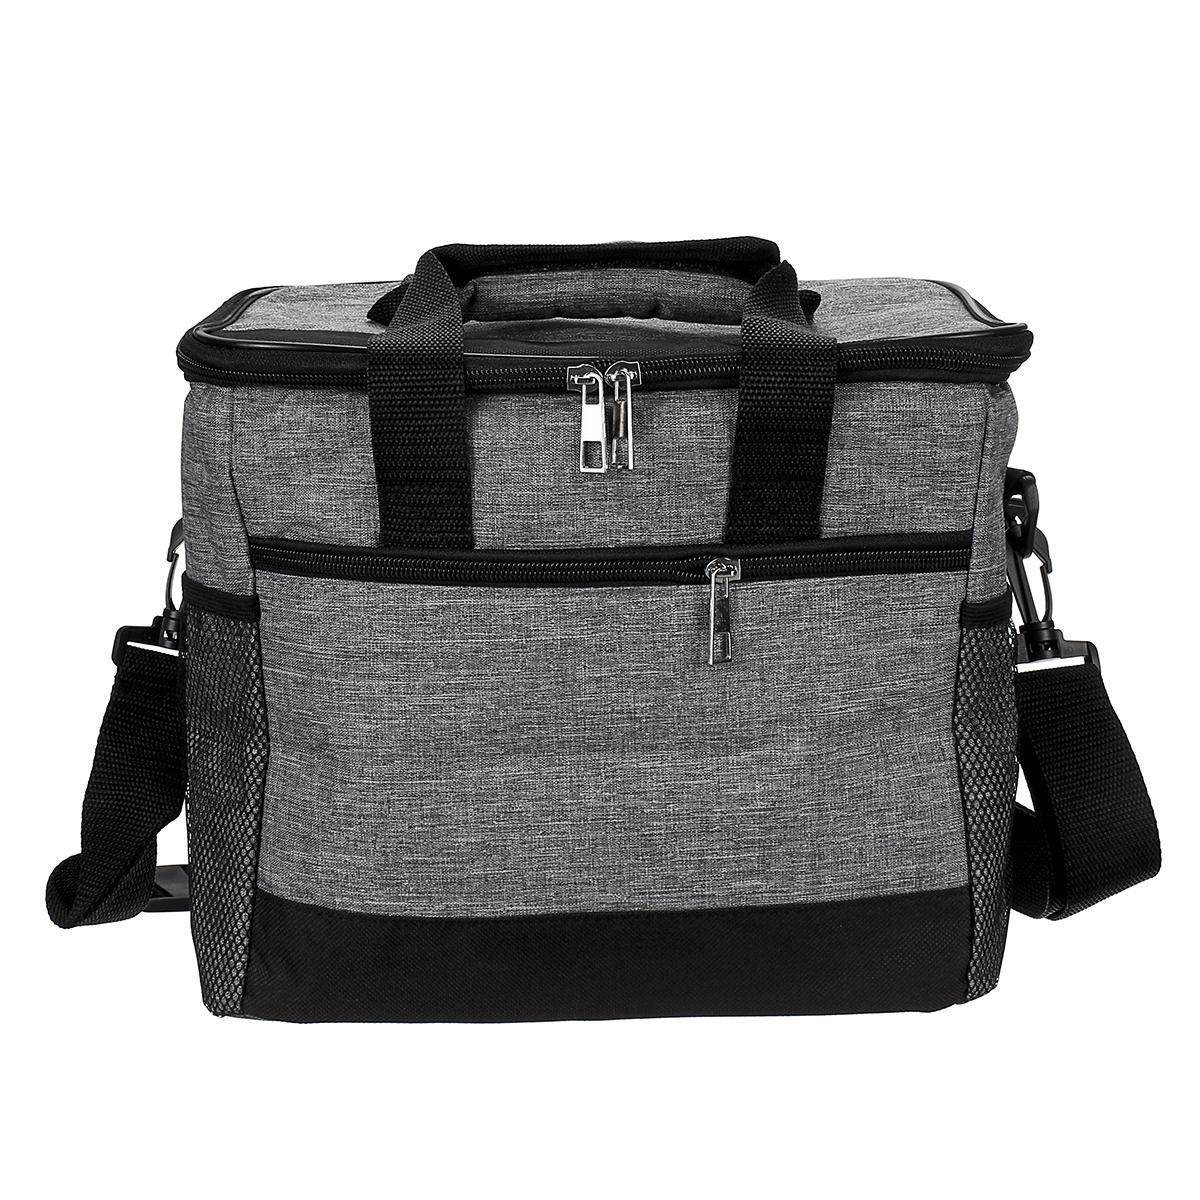 Outdoor Insulated Picnic Bag Camping Traveling Portable Lunch Bag Lunch Box Handbag